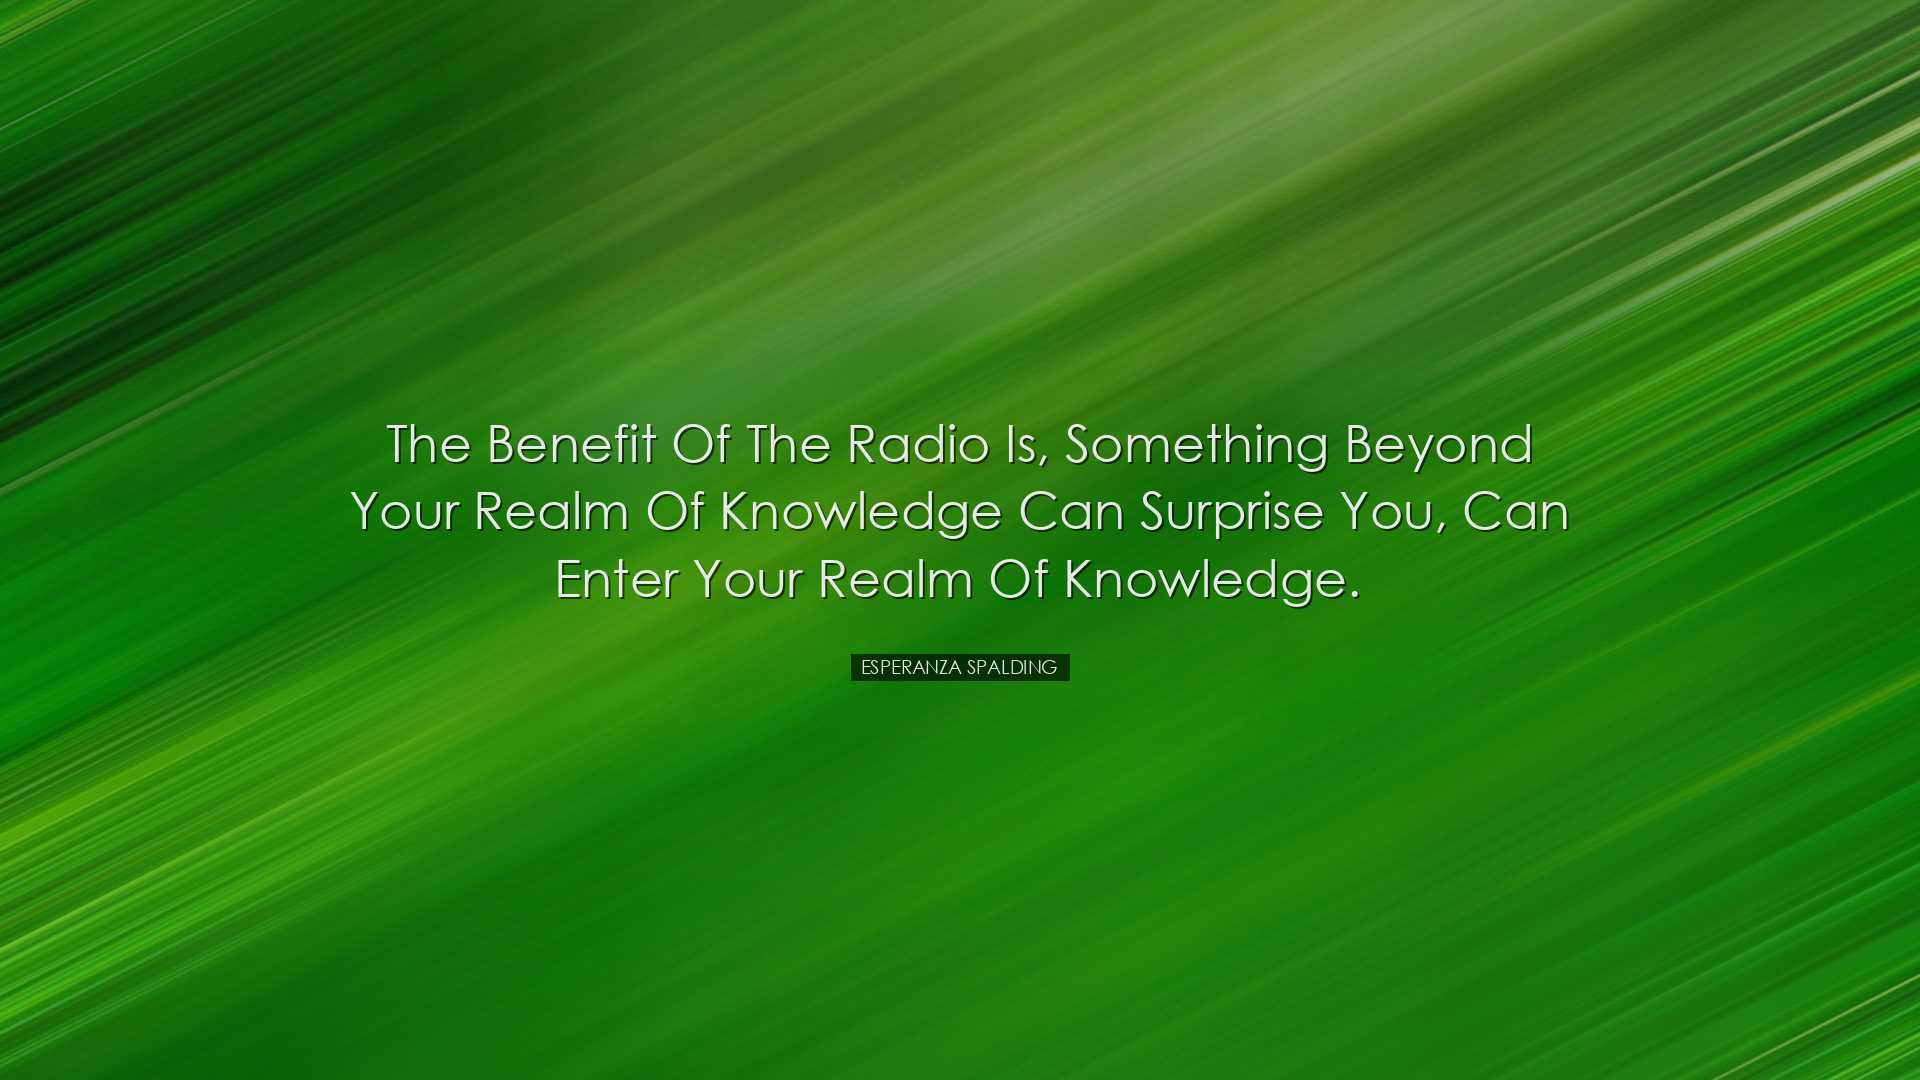 The benefit of the radio is, something beyond your realm of knowle